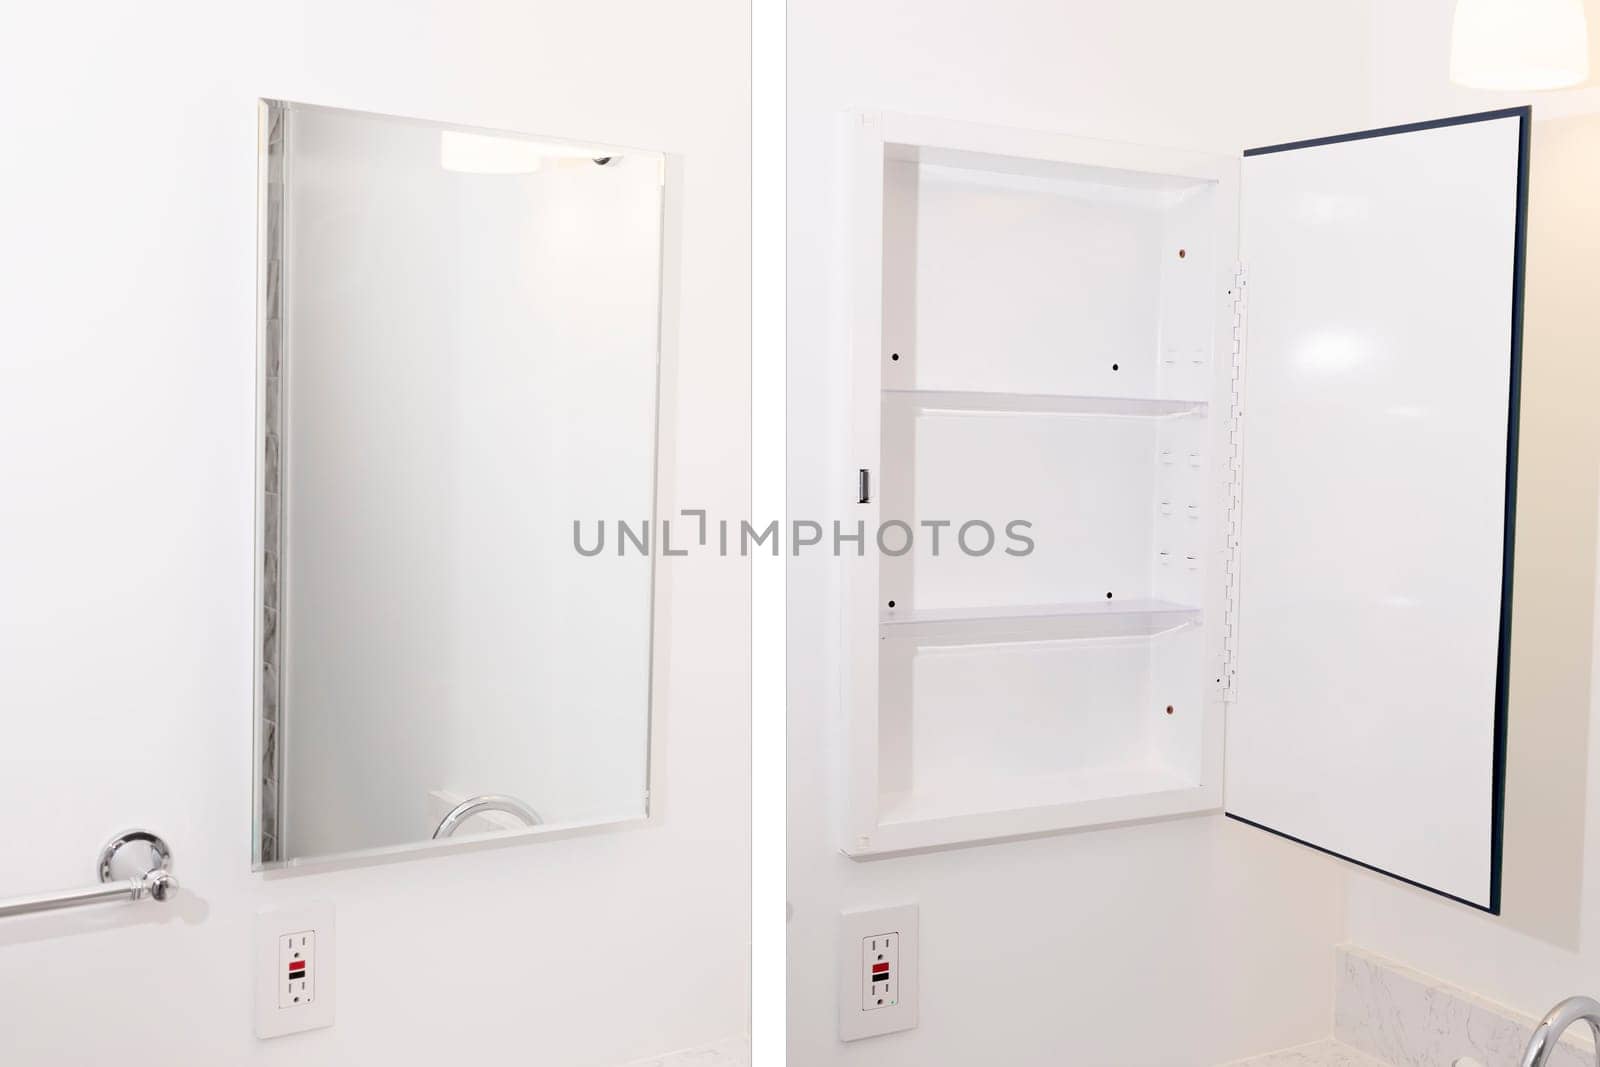 Empty Bathroom Medicine Cabinet With Mirror Open And Closed, White Walls. Pills And Drug Medicament Container Mockup. Open Mirror Door Stand. Horizontal Plane, Template. High Quality Photo